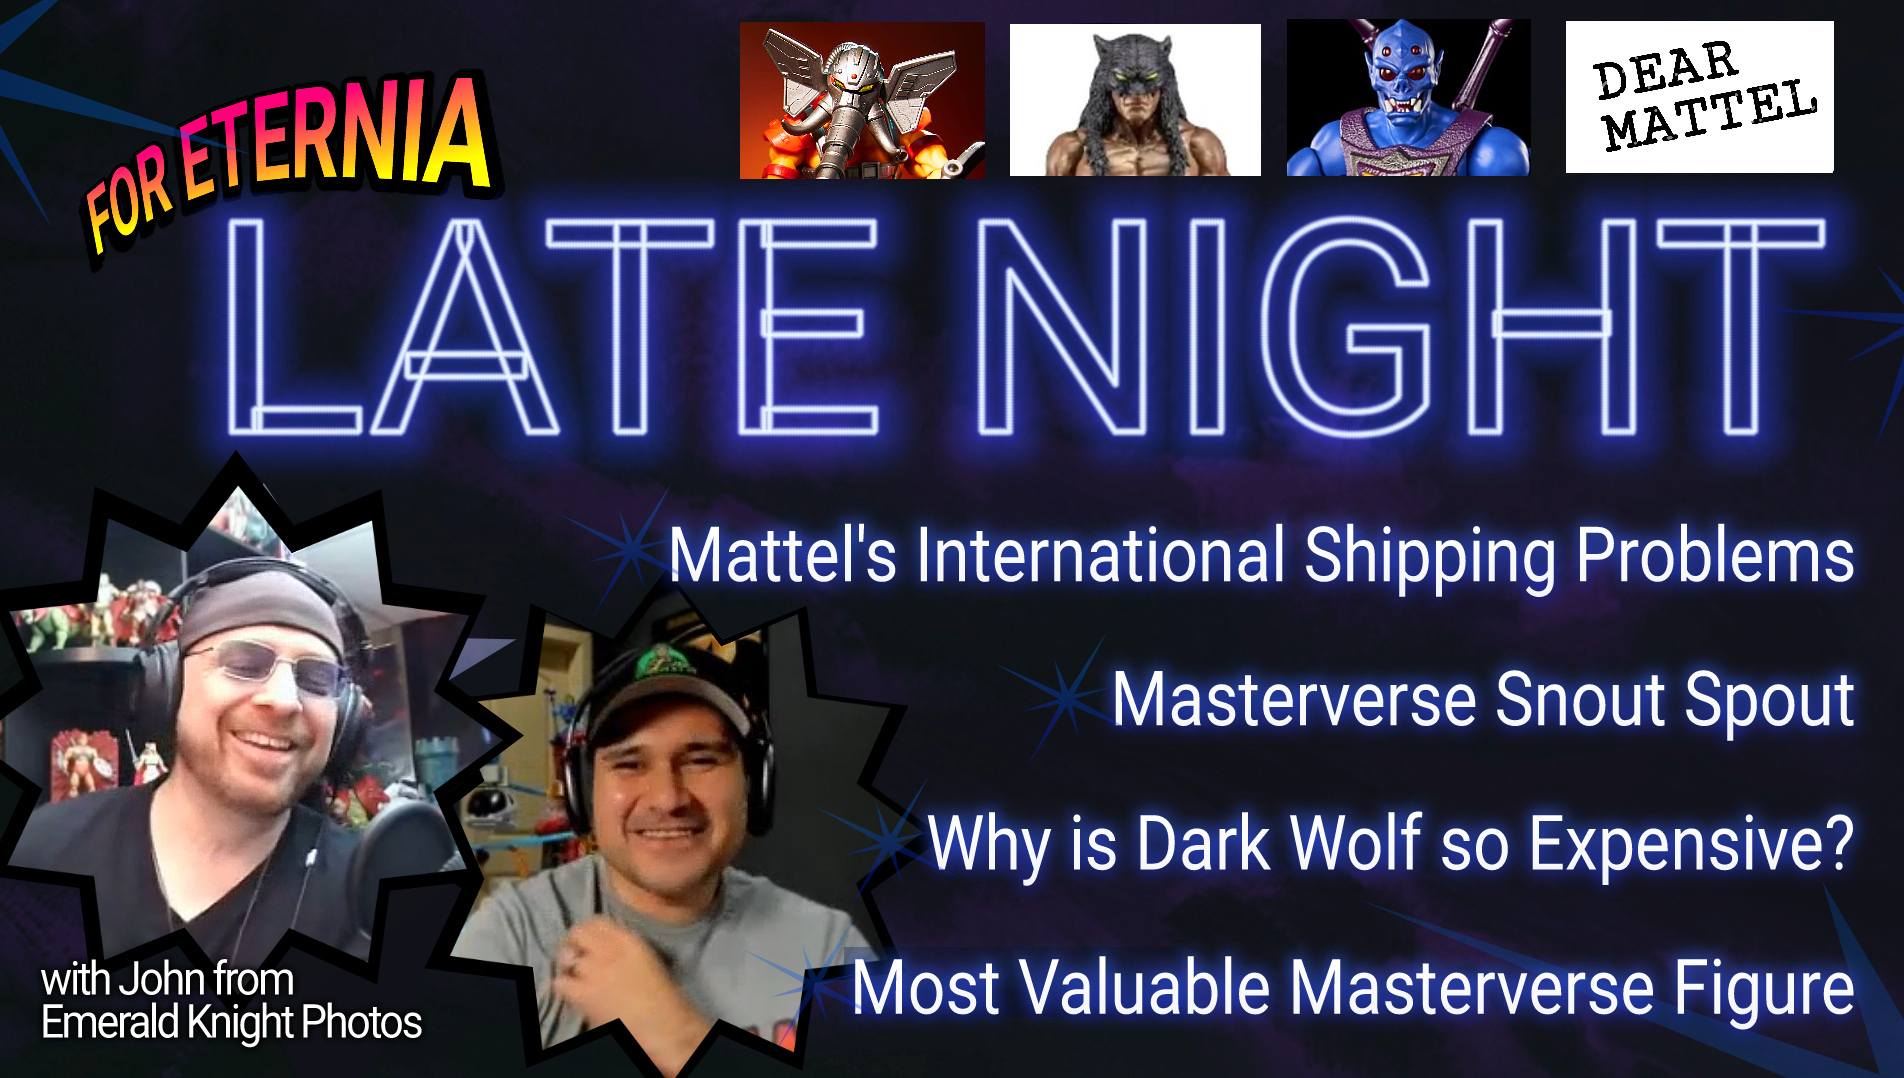 FOR ETERNIA LATE NIGHT! Podcasting with guest John from Emerald Knight Photos talking Mattel International Shipping Problems, Masterverse Snout Spout and more